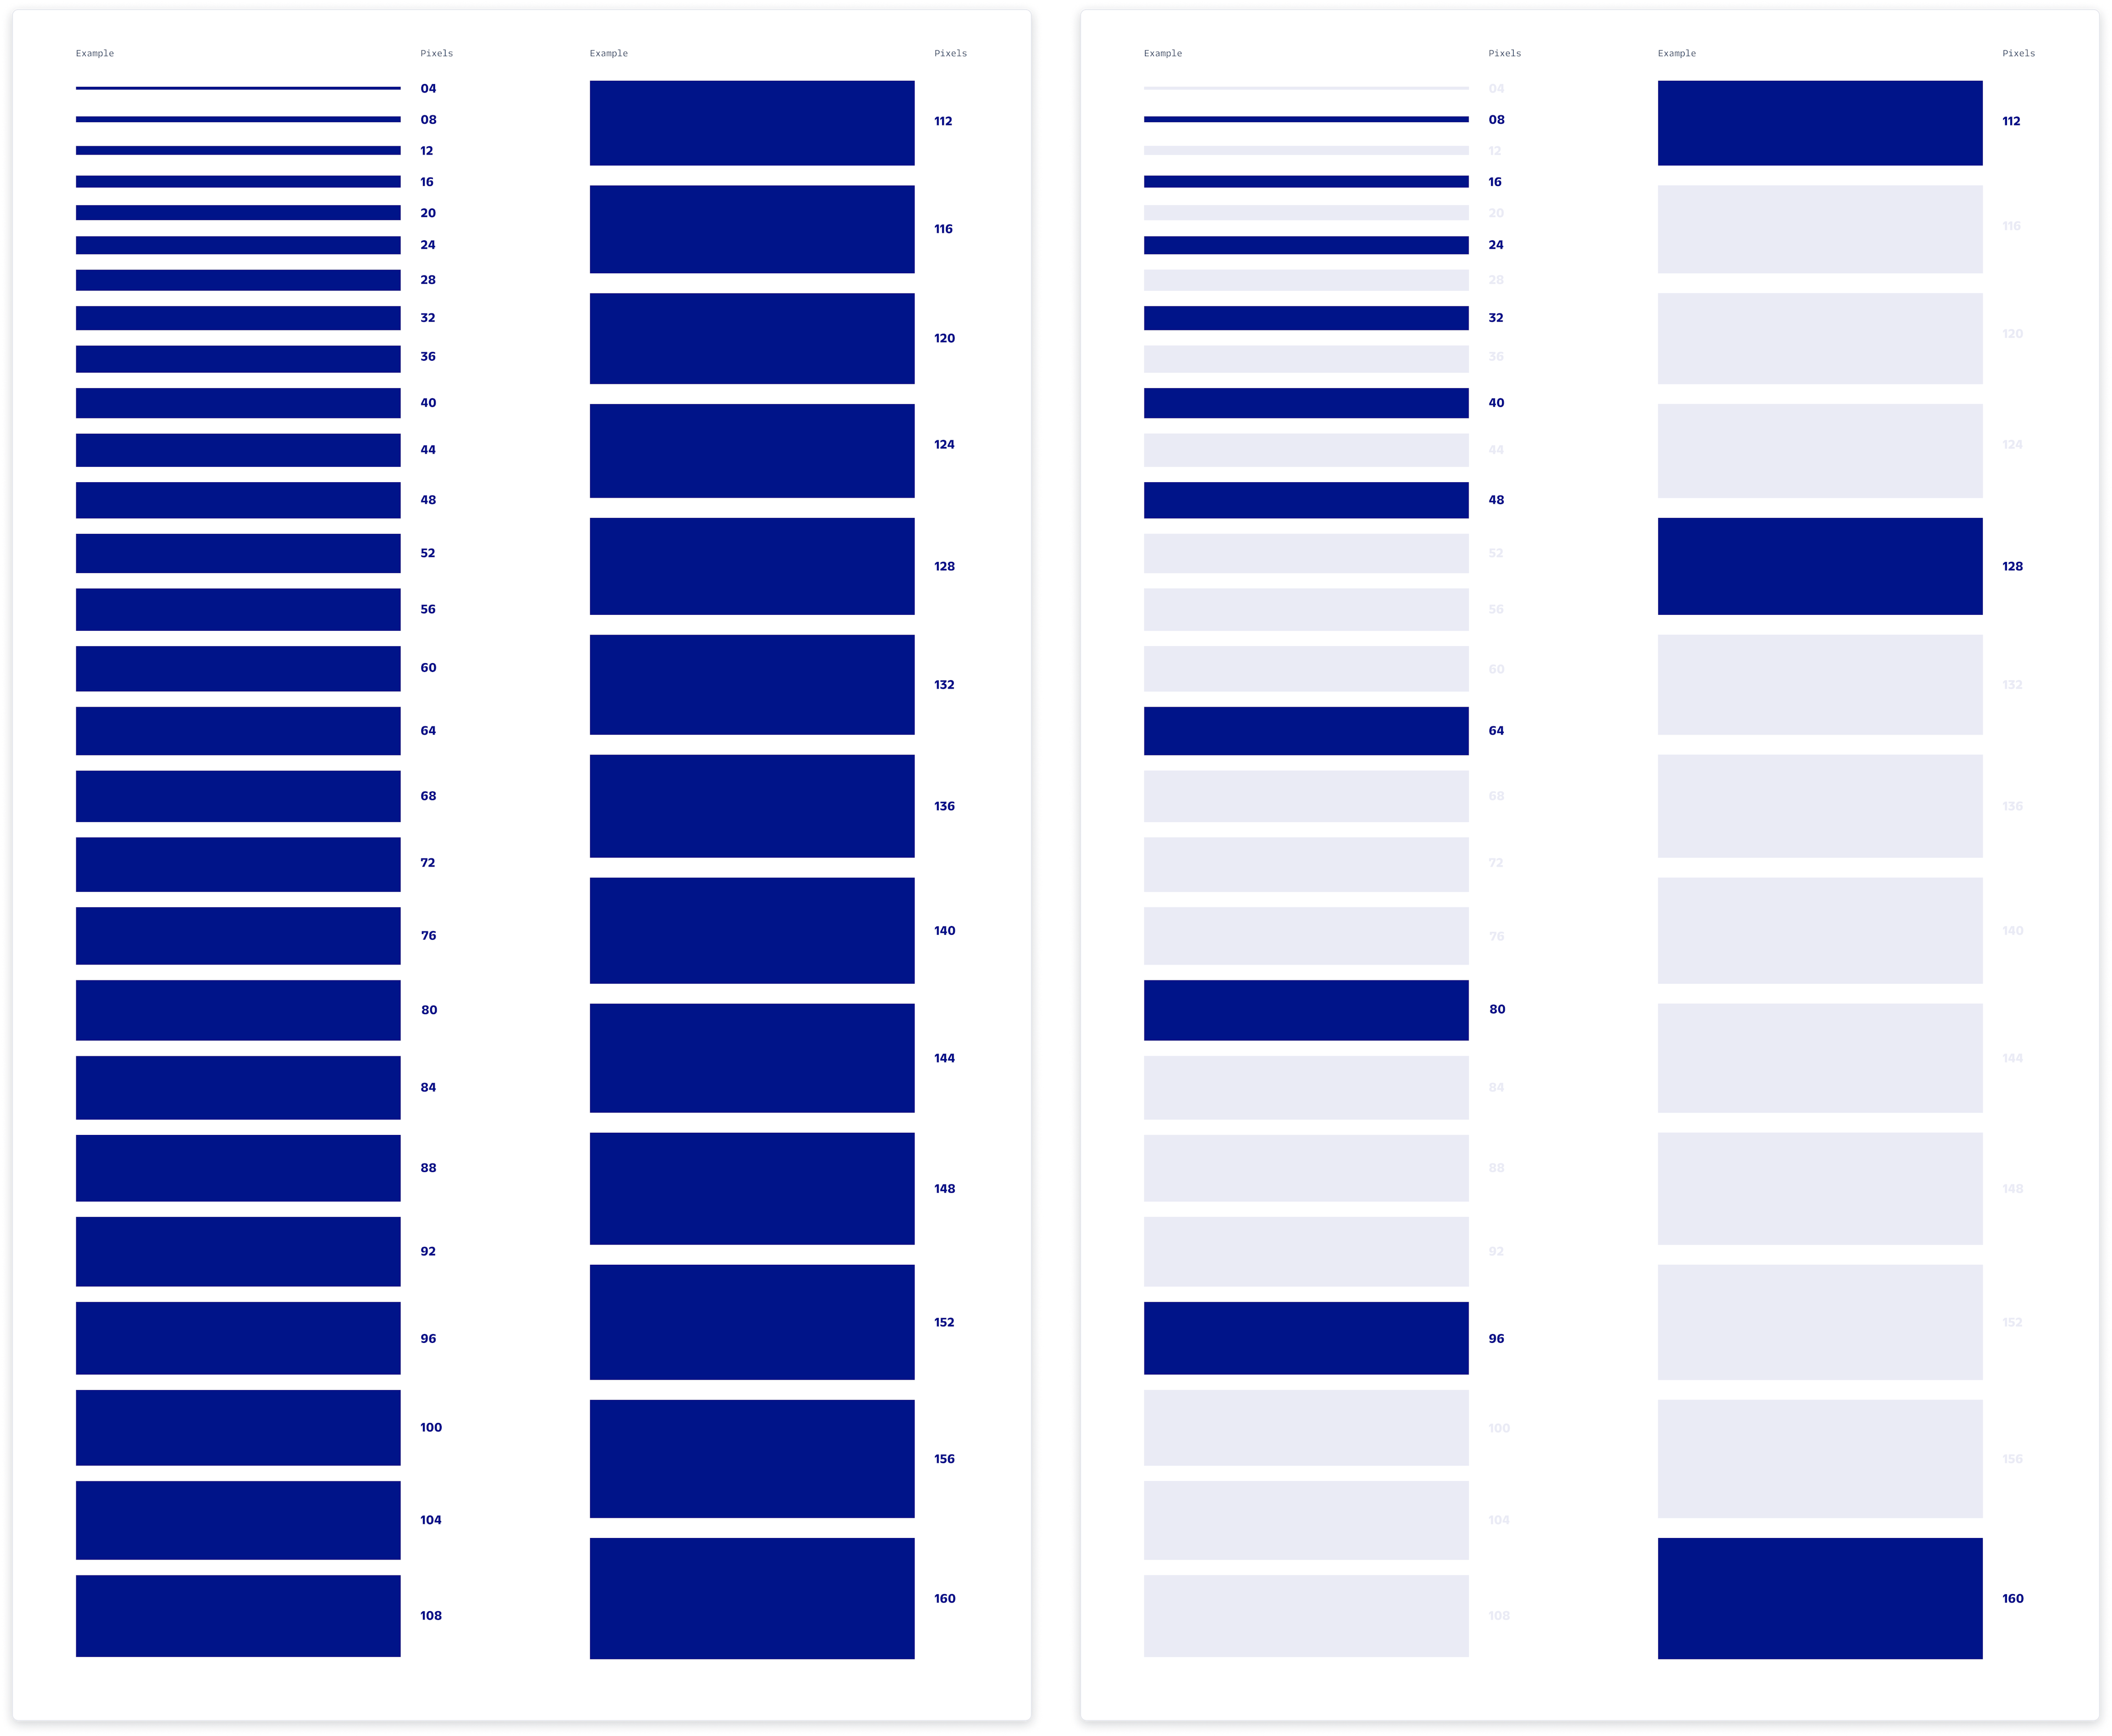 Visual representation of the 4-pixel and 8-pixel spacing grids